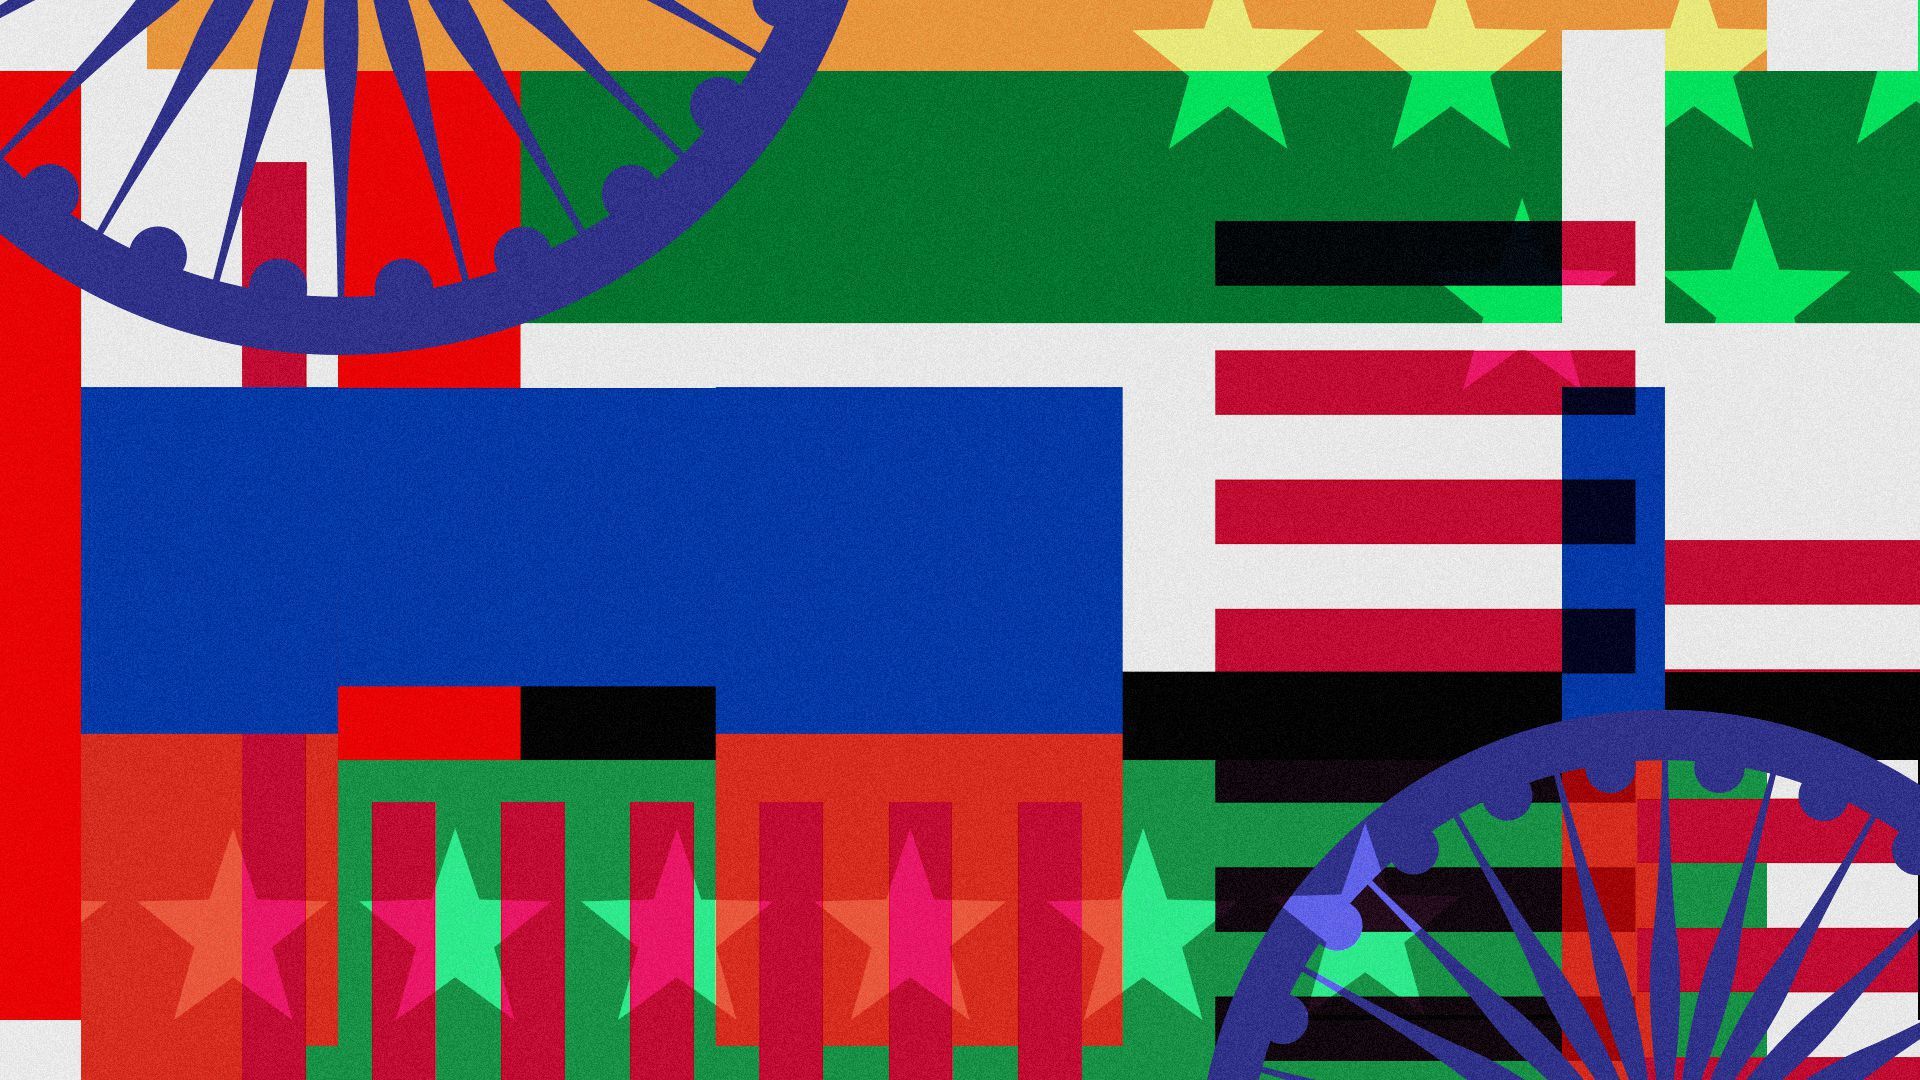 An illustration shows a mashup of the U.S., Indian and Emirati flags.